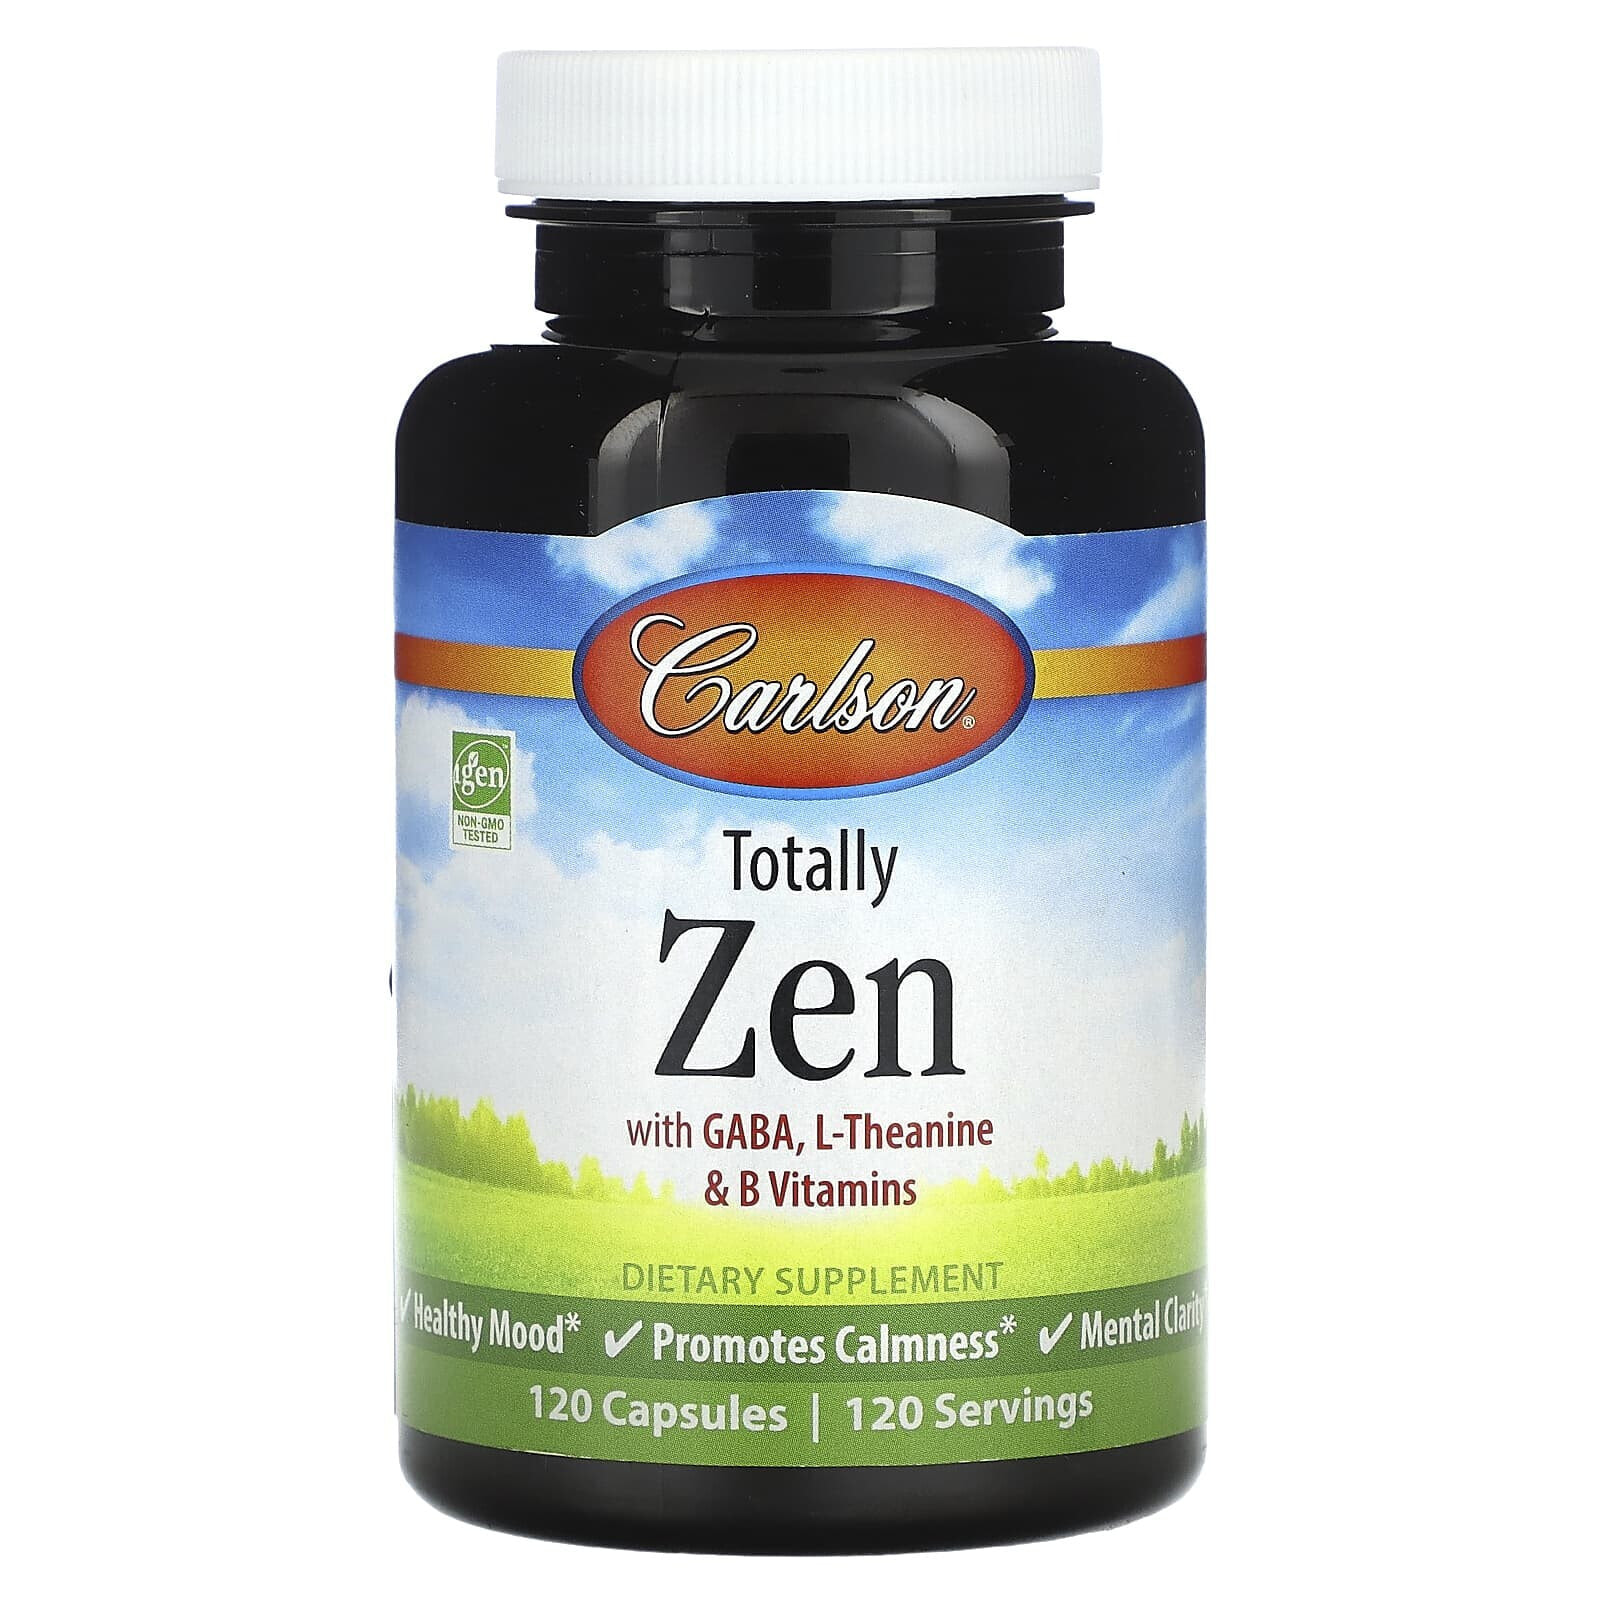 Totally Zen with GABA, L-Theanine & B Vitamins, 120 Capsules